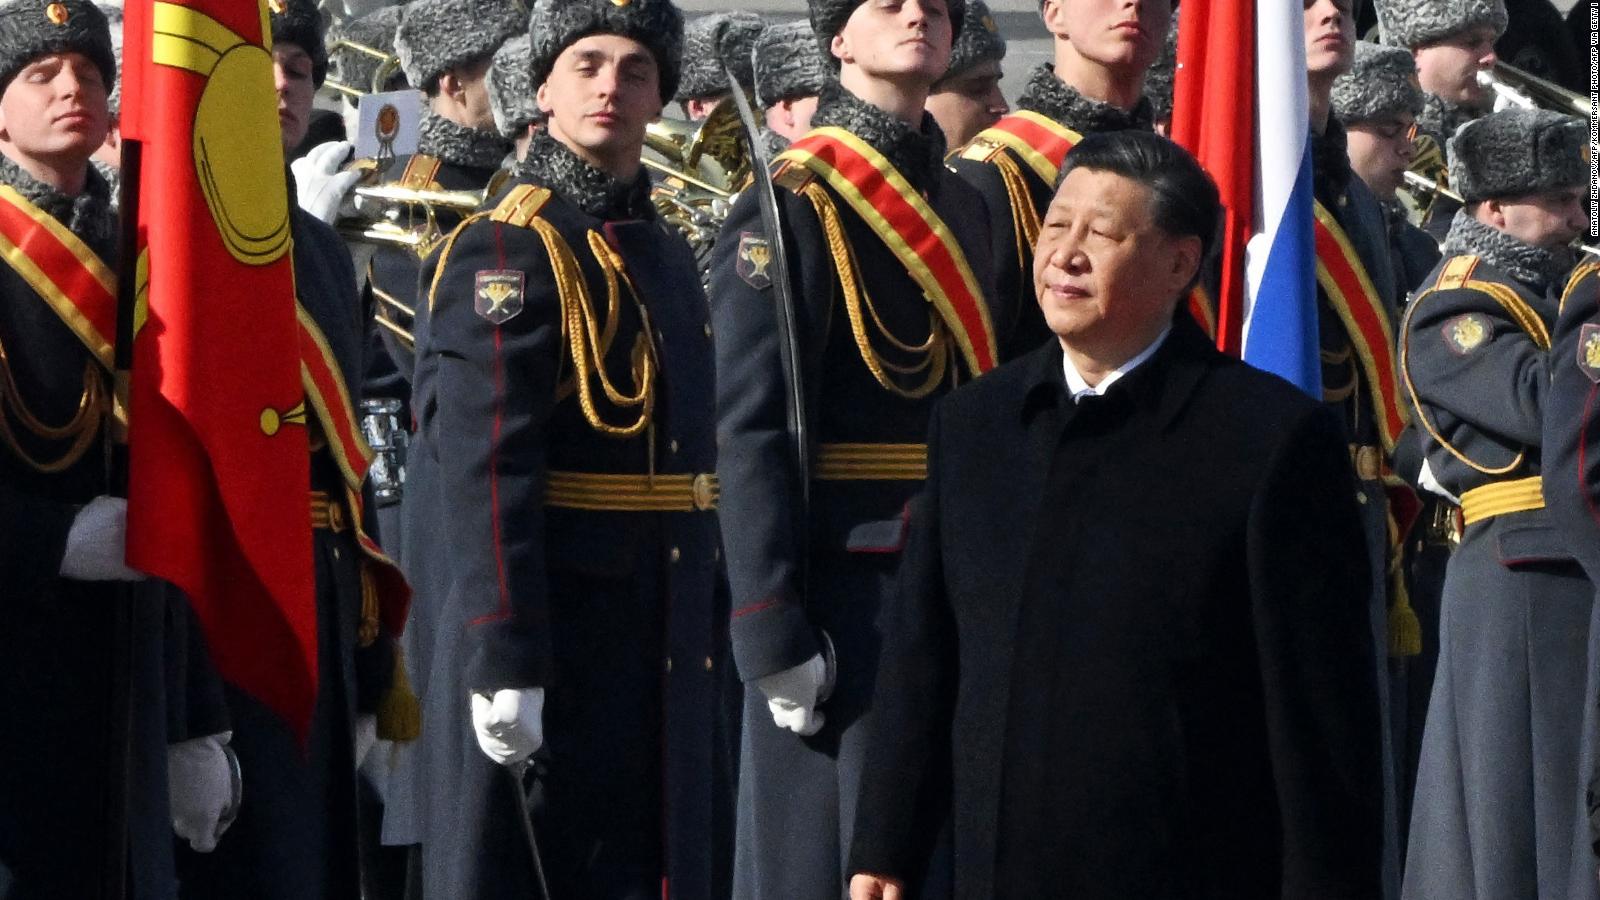 Look at the state honors that were given to Xi Jinping when he arrived in Russia